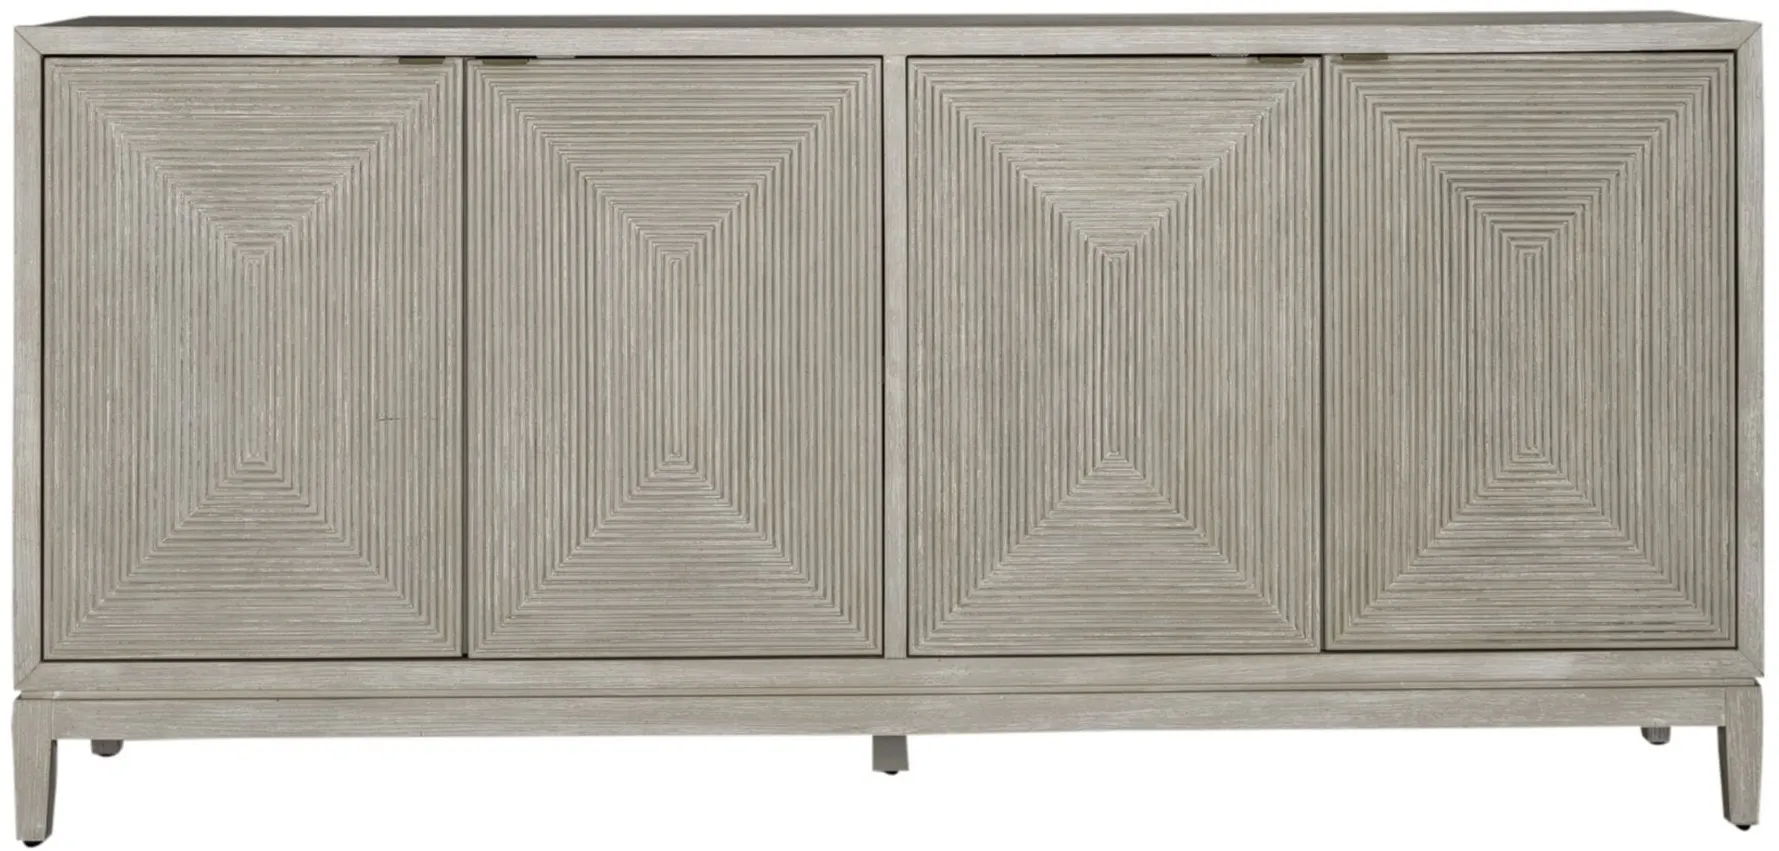 Kinsley 4 Door Accent Cabinet in Washed Taupe & Silver Champagne Finish by Liberty Furniture